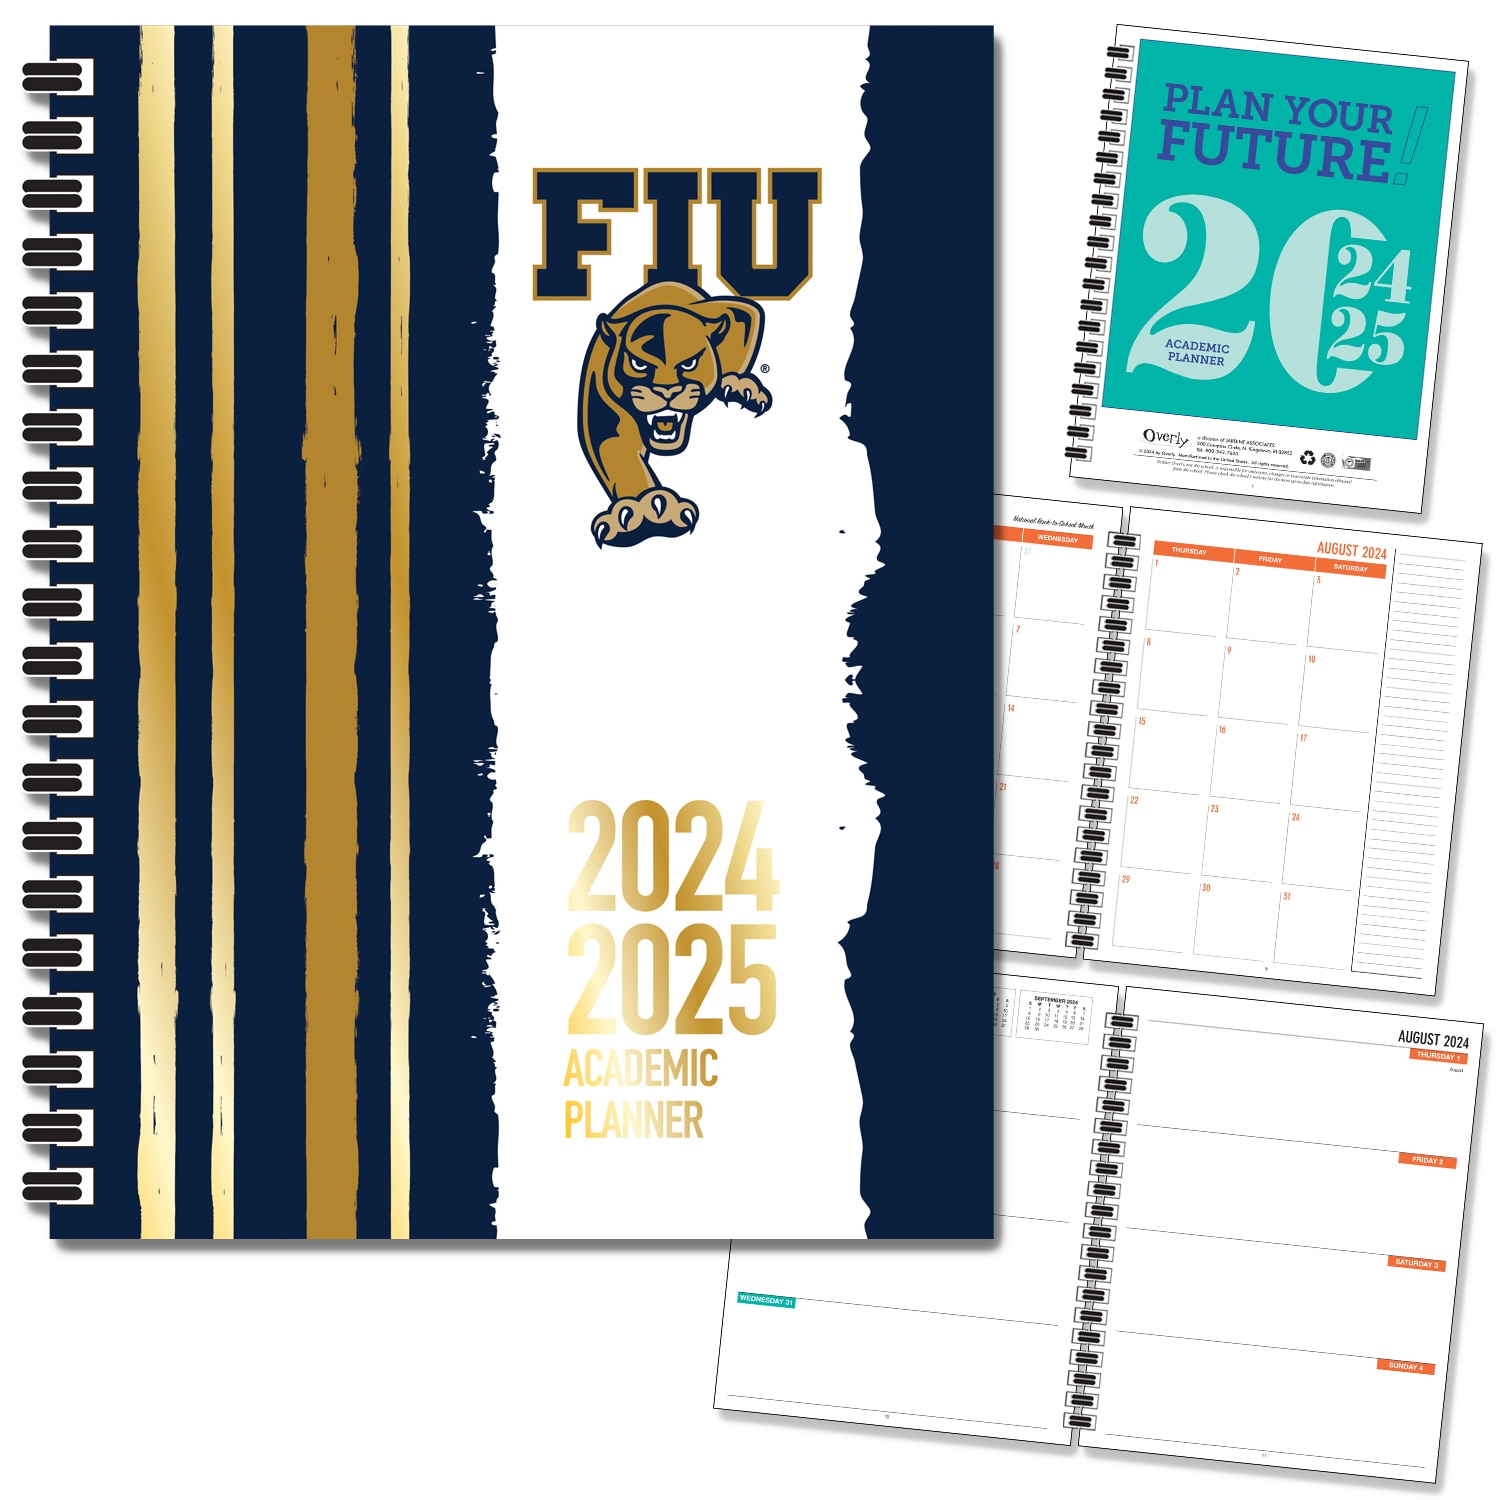 FY 25 Spirit Soft Touch Foil - Mascot Imprinted Planner 24-25 AY 7x9